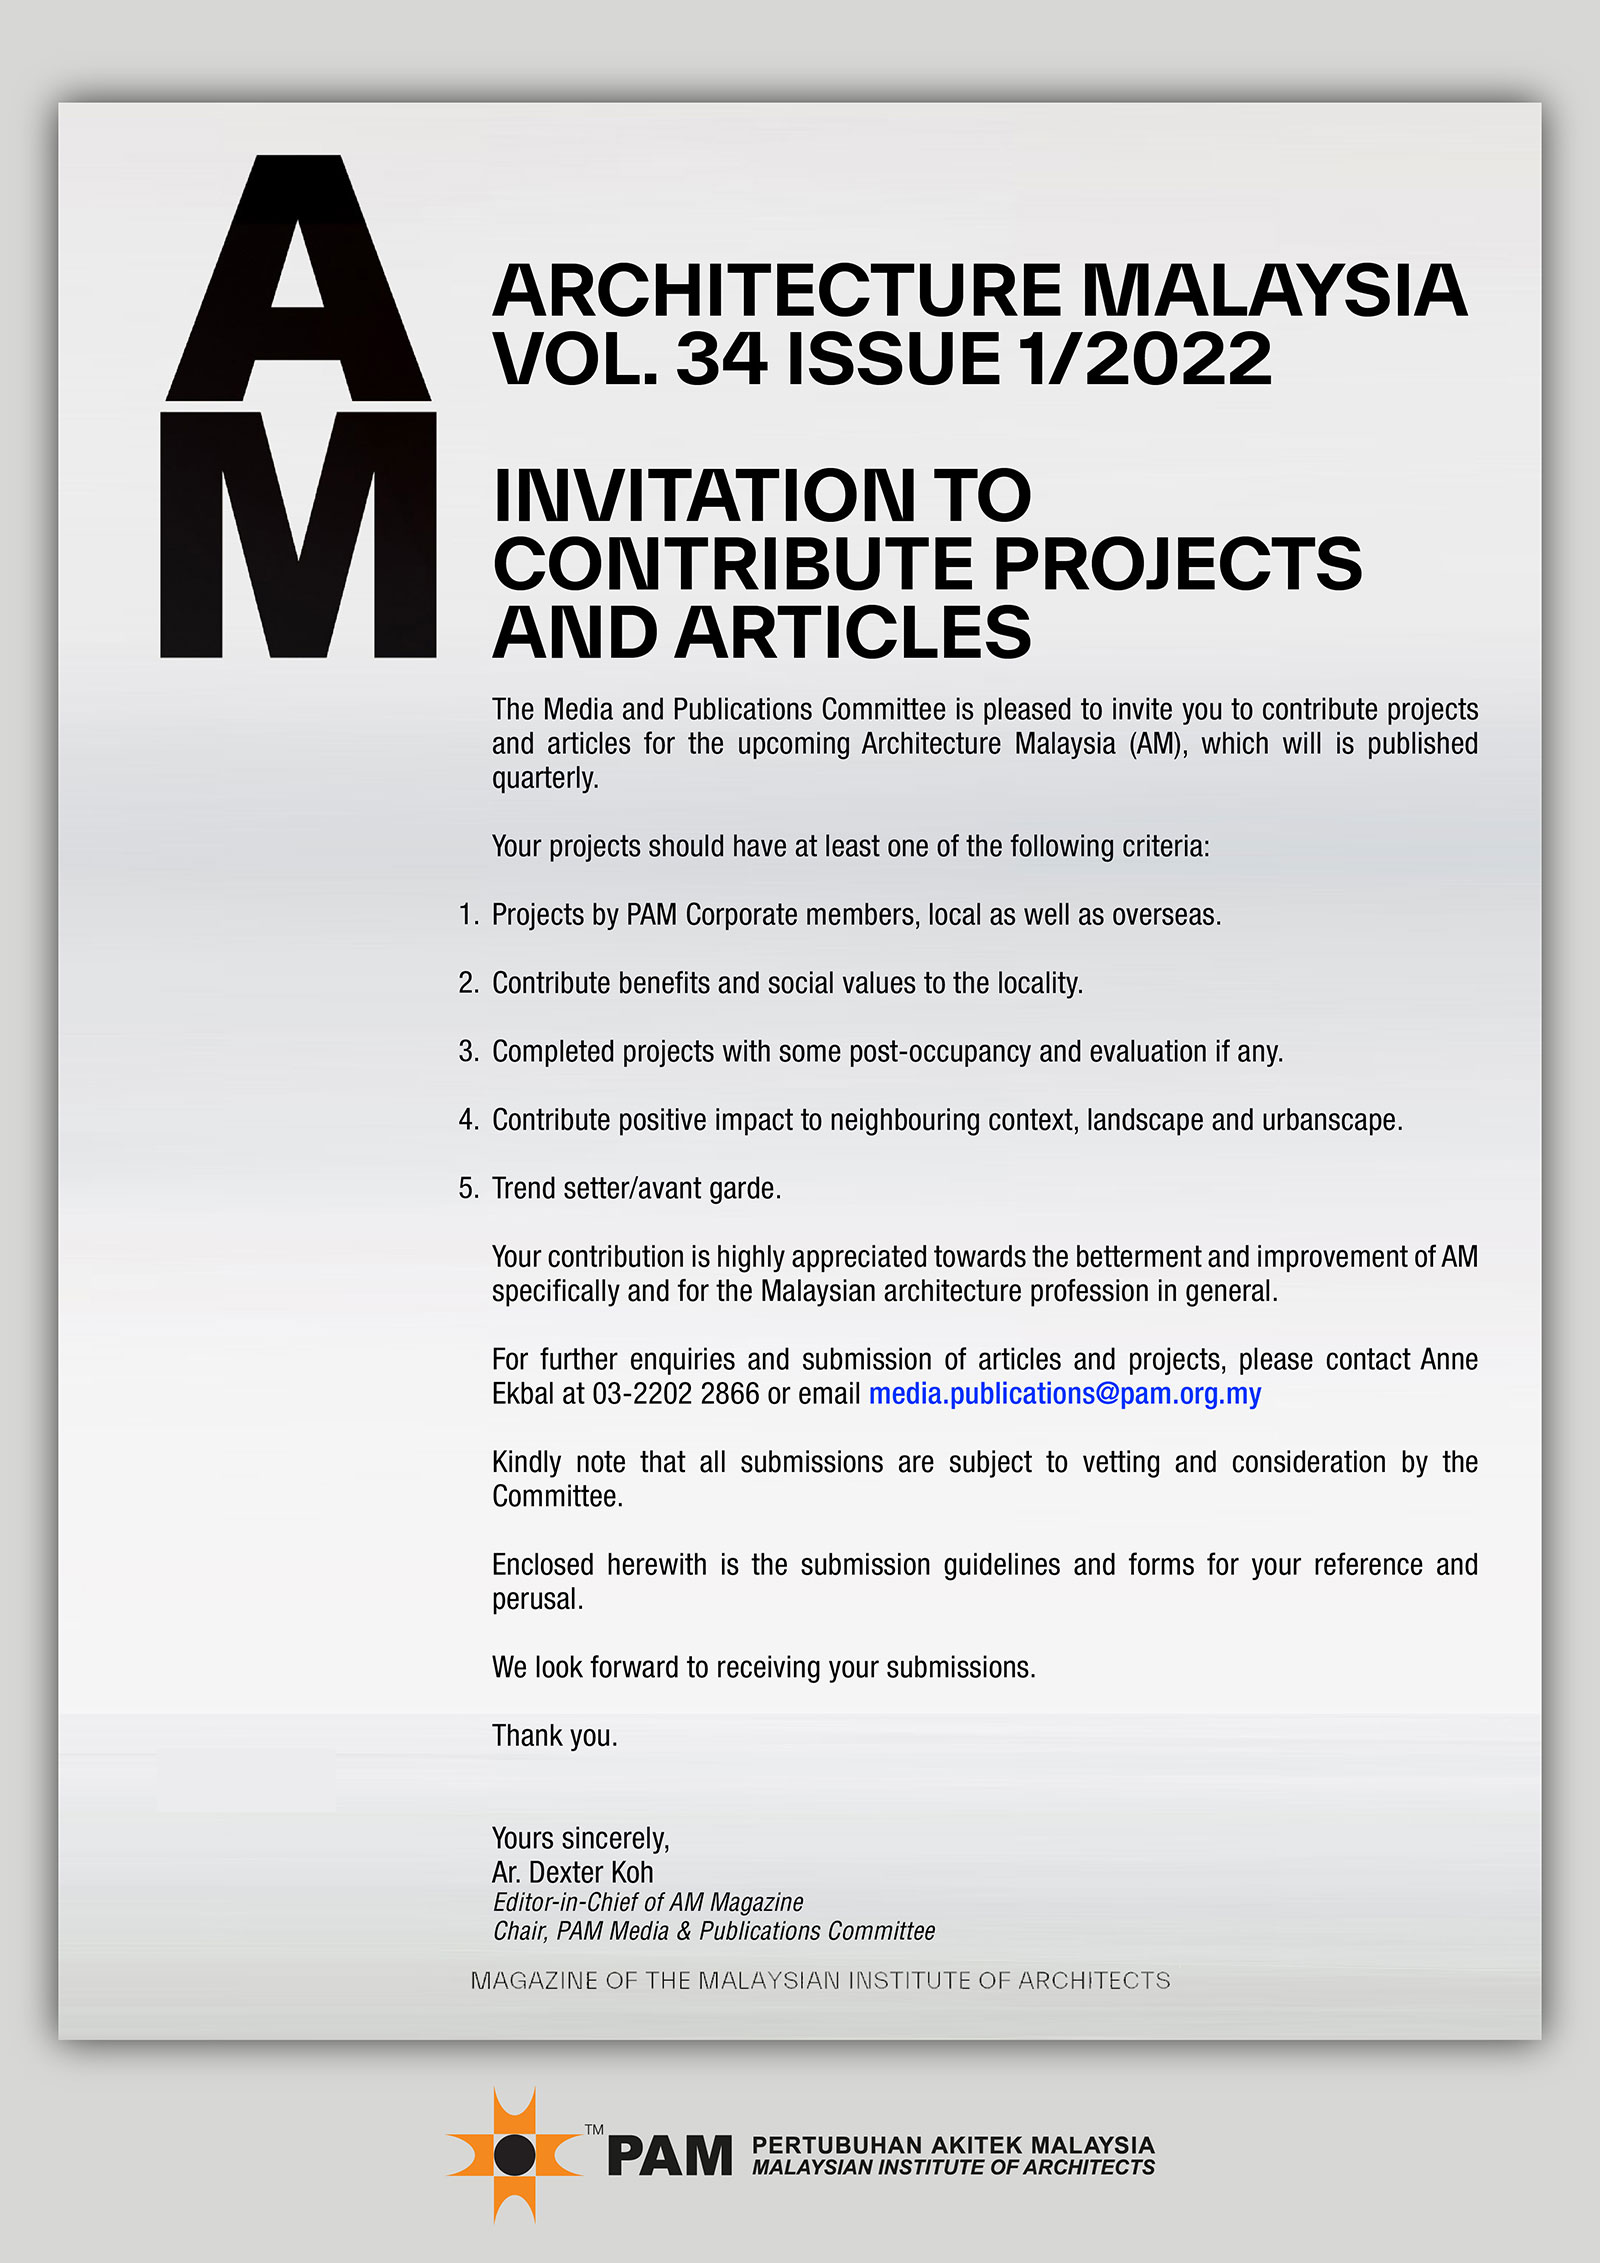 INVITATION TO CONTRIBUTE PROJECTS AND ARTICLES FOR THE NEW AM MAGAZINE